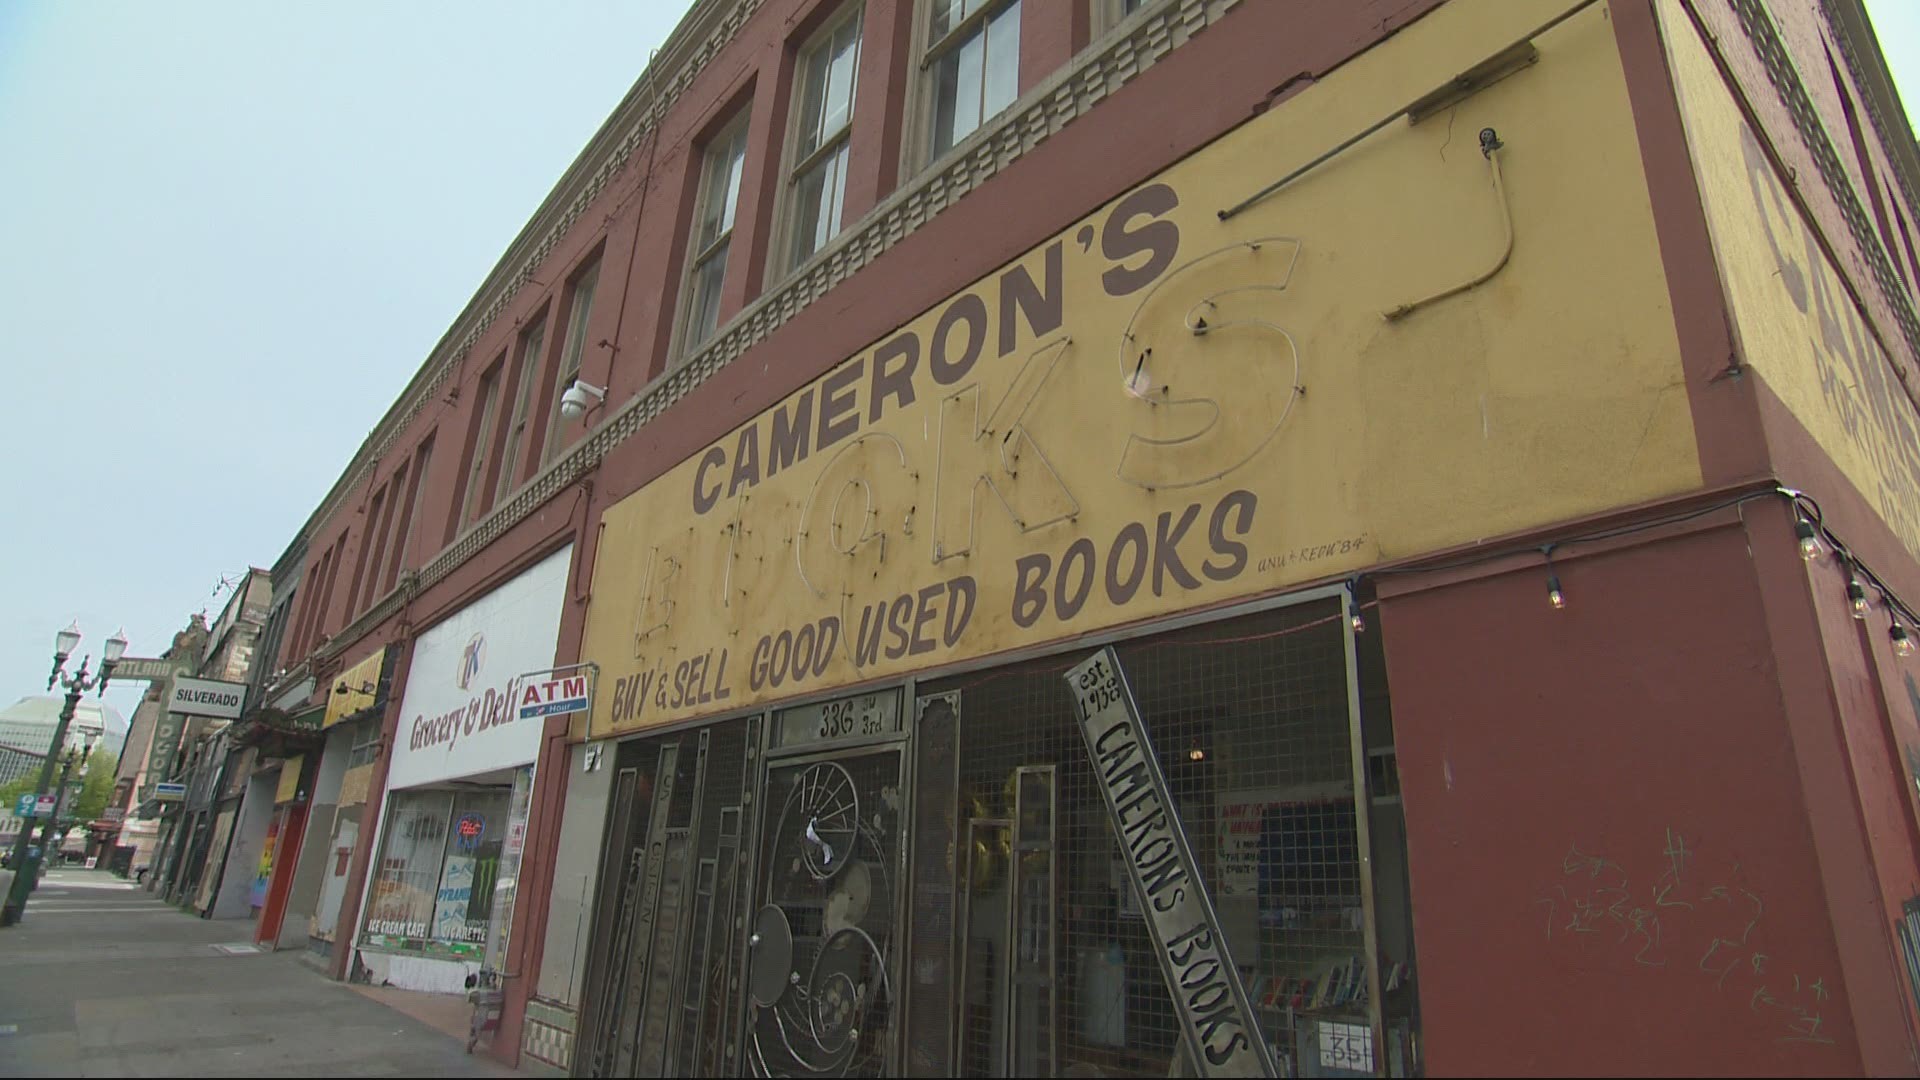 The final chapter of Portland’s oldest used book store is ending. Morgan Romero stopped by Cameron’s Books before it closes for good.